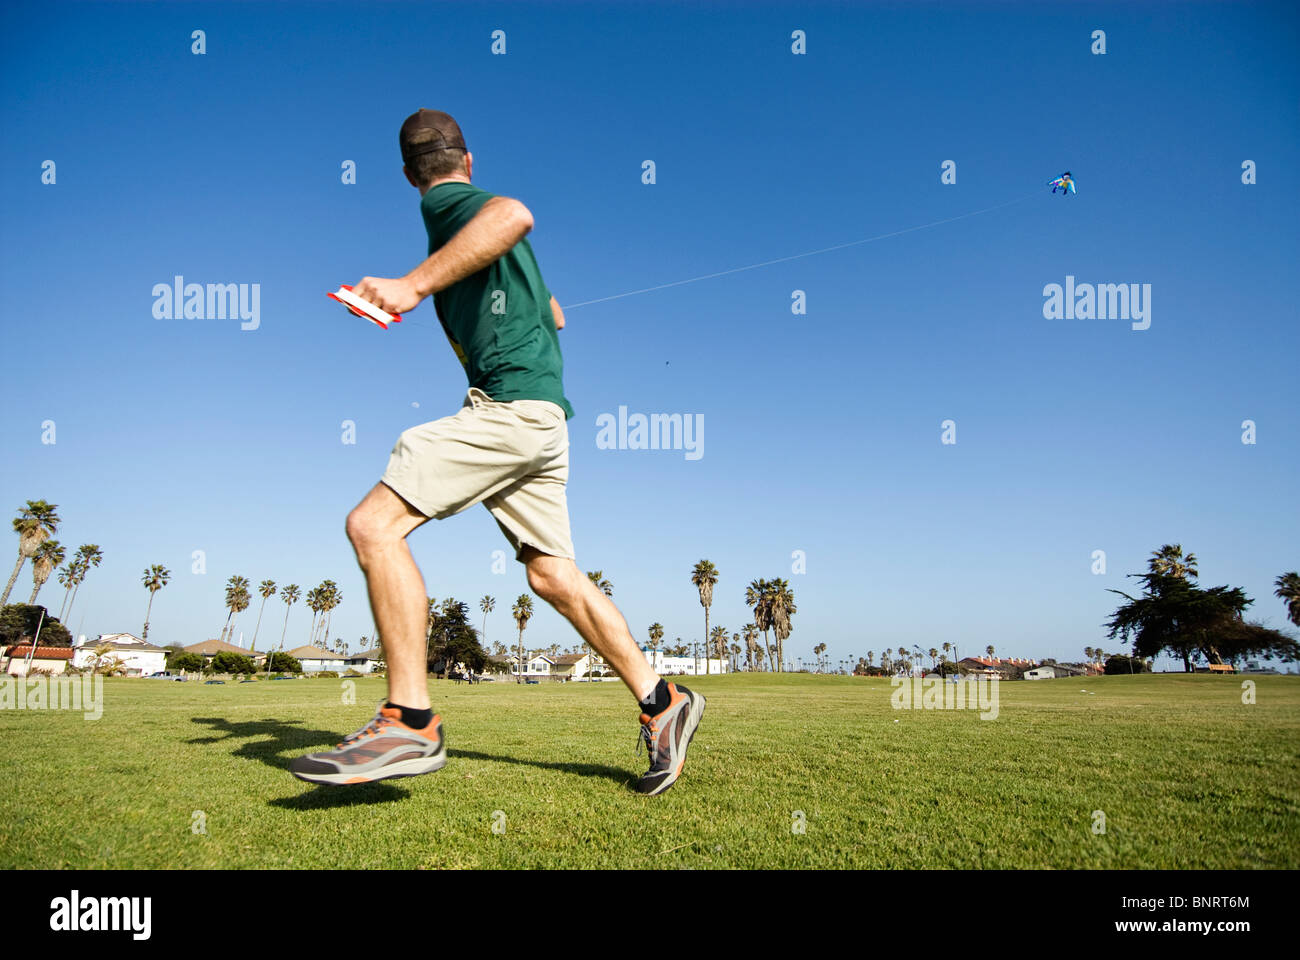 A young man flies a kite on a sunny California afternoon in Ventura, California. Stock Photo